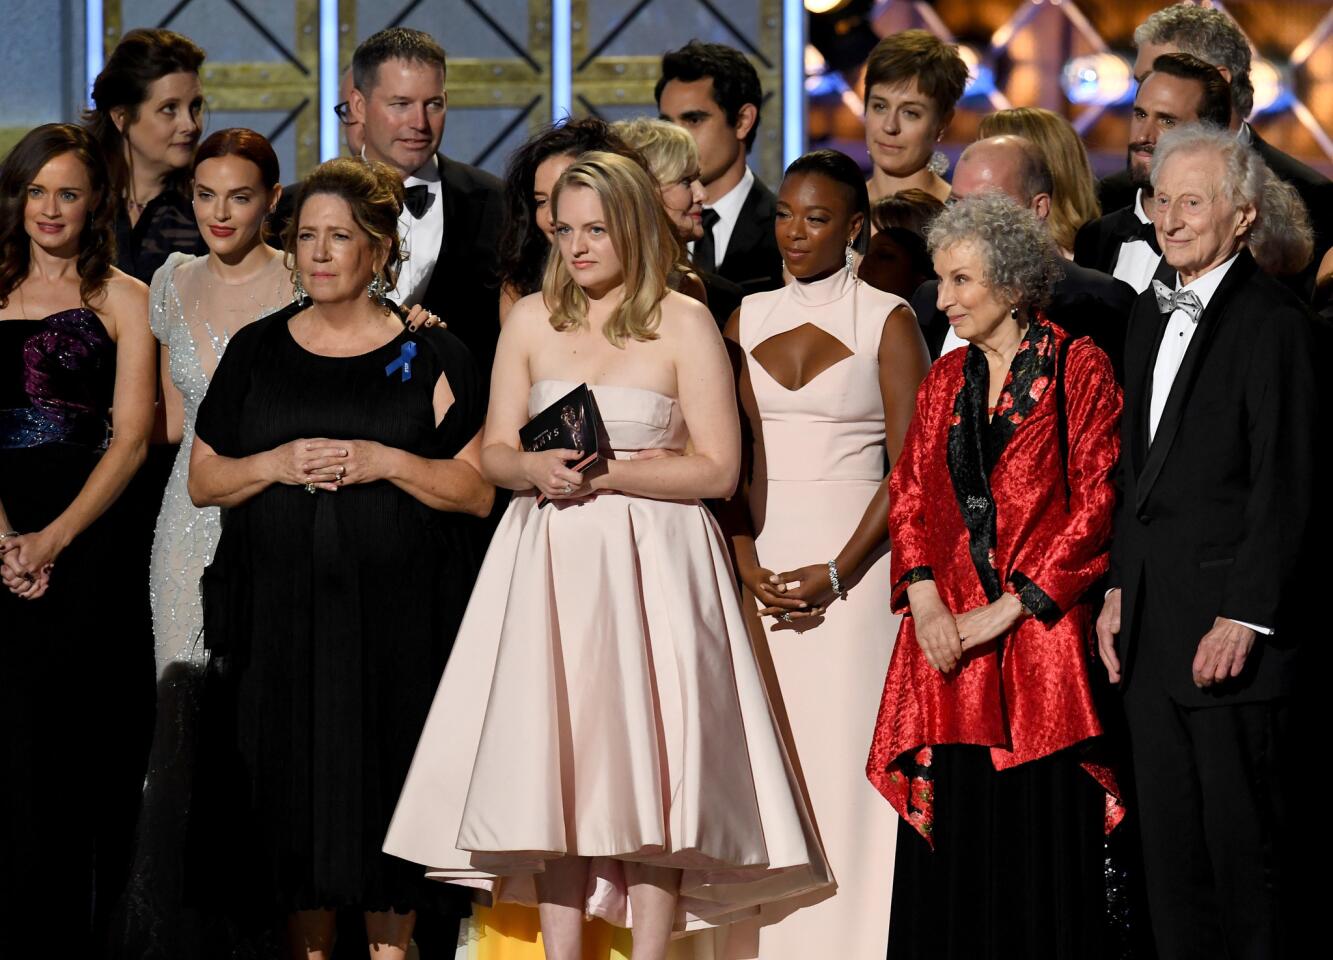 Actress Elisabeth Moss, center, and author Margaret Atwood (in red) with cast and crew of "The Handmaid's Tale" accept the drama series award onstage.